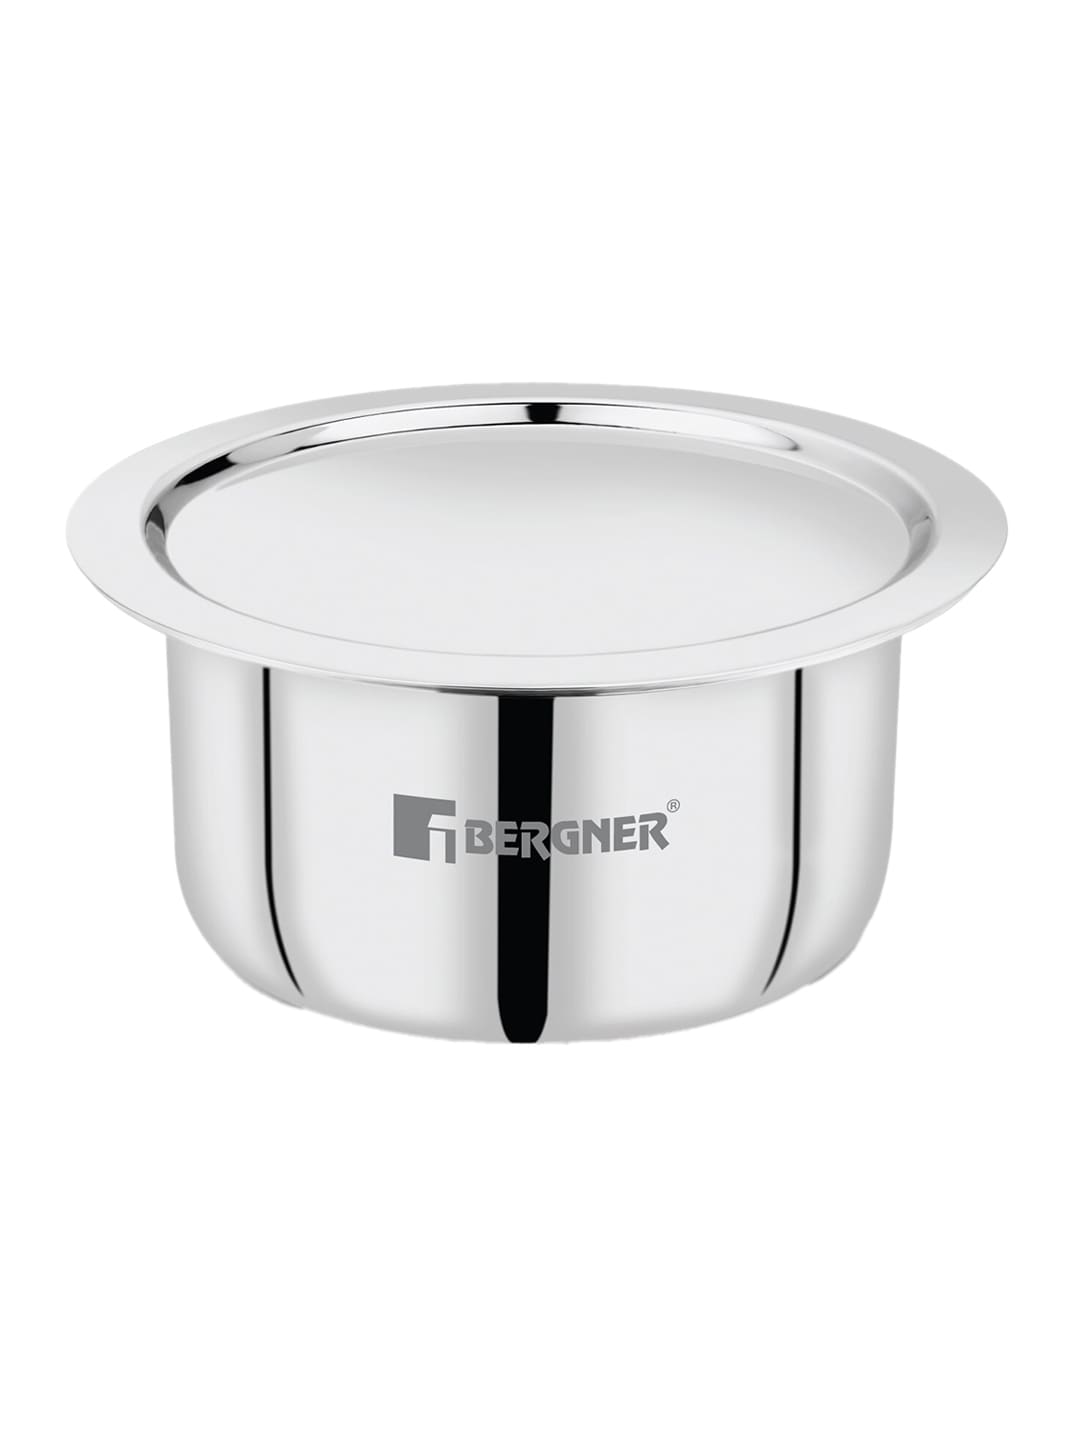 BERGNER Silver-Toned Tripro Triply Stainless Steel Tope With Lid Price in India